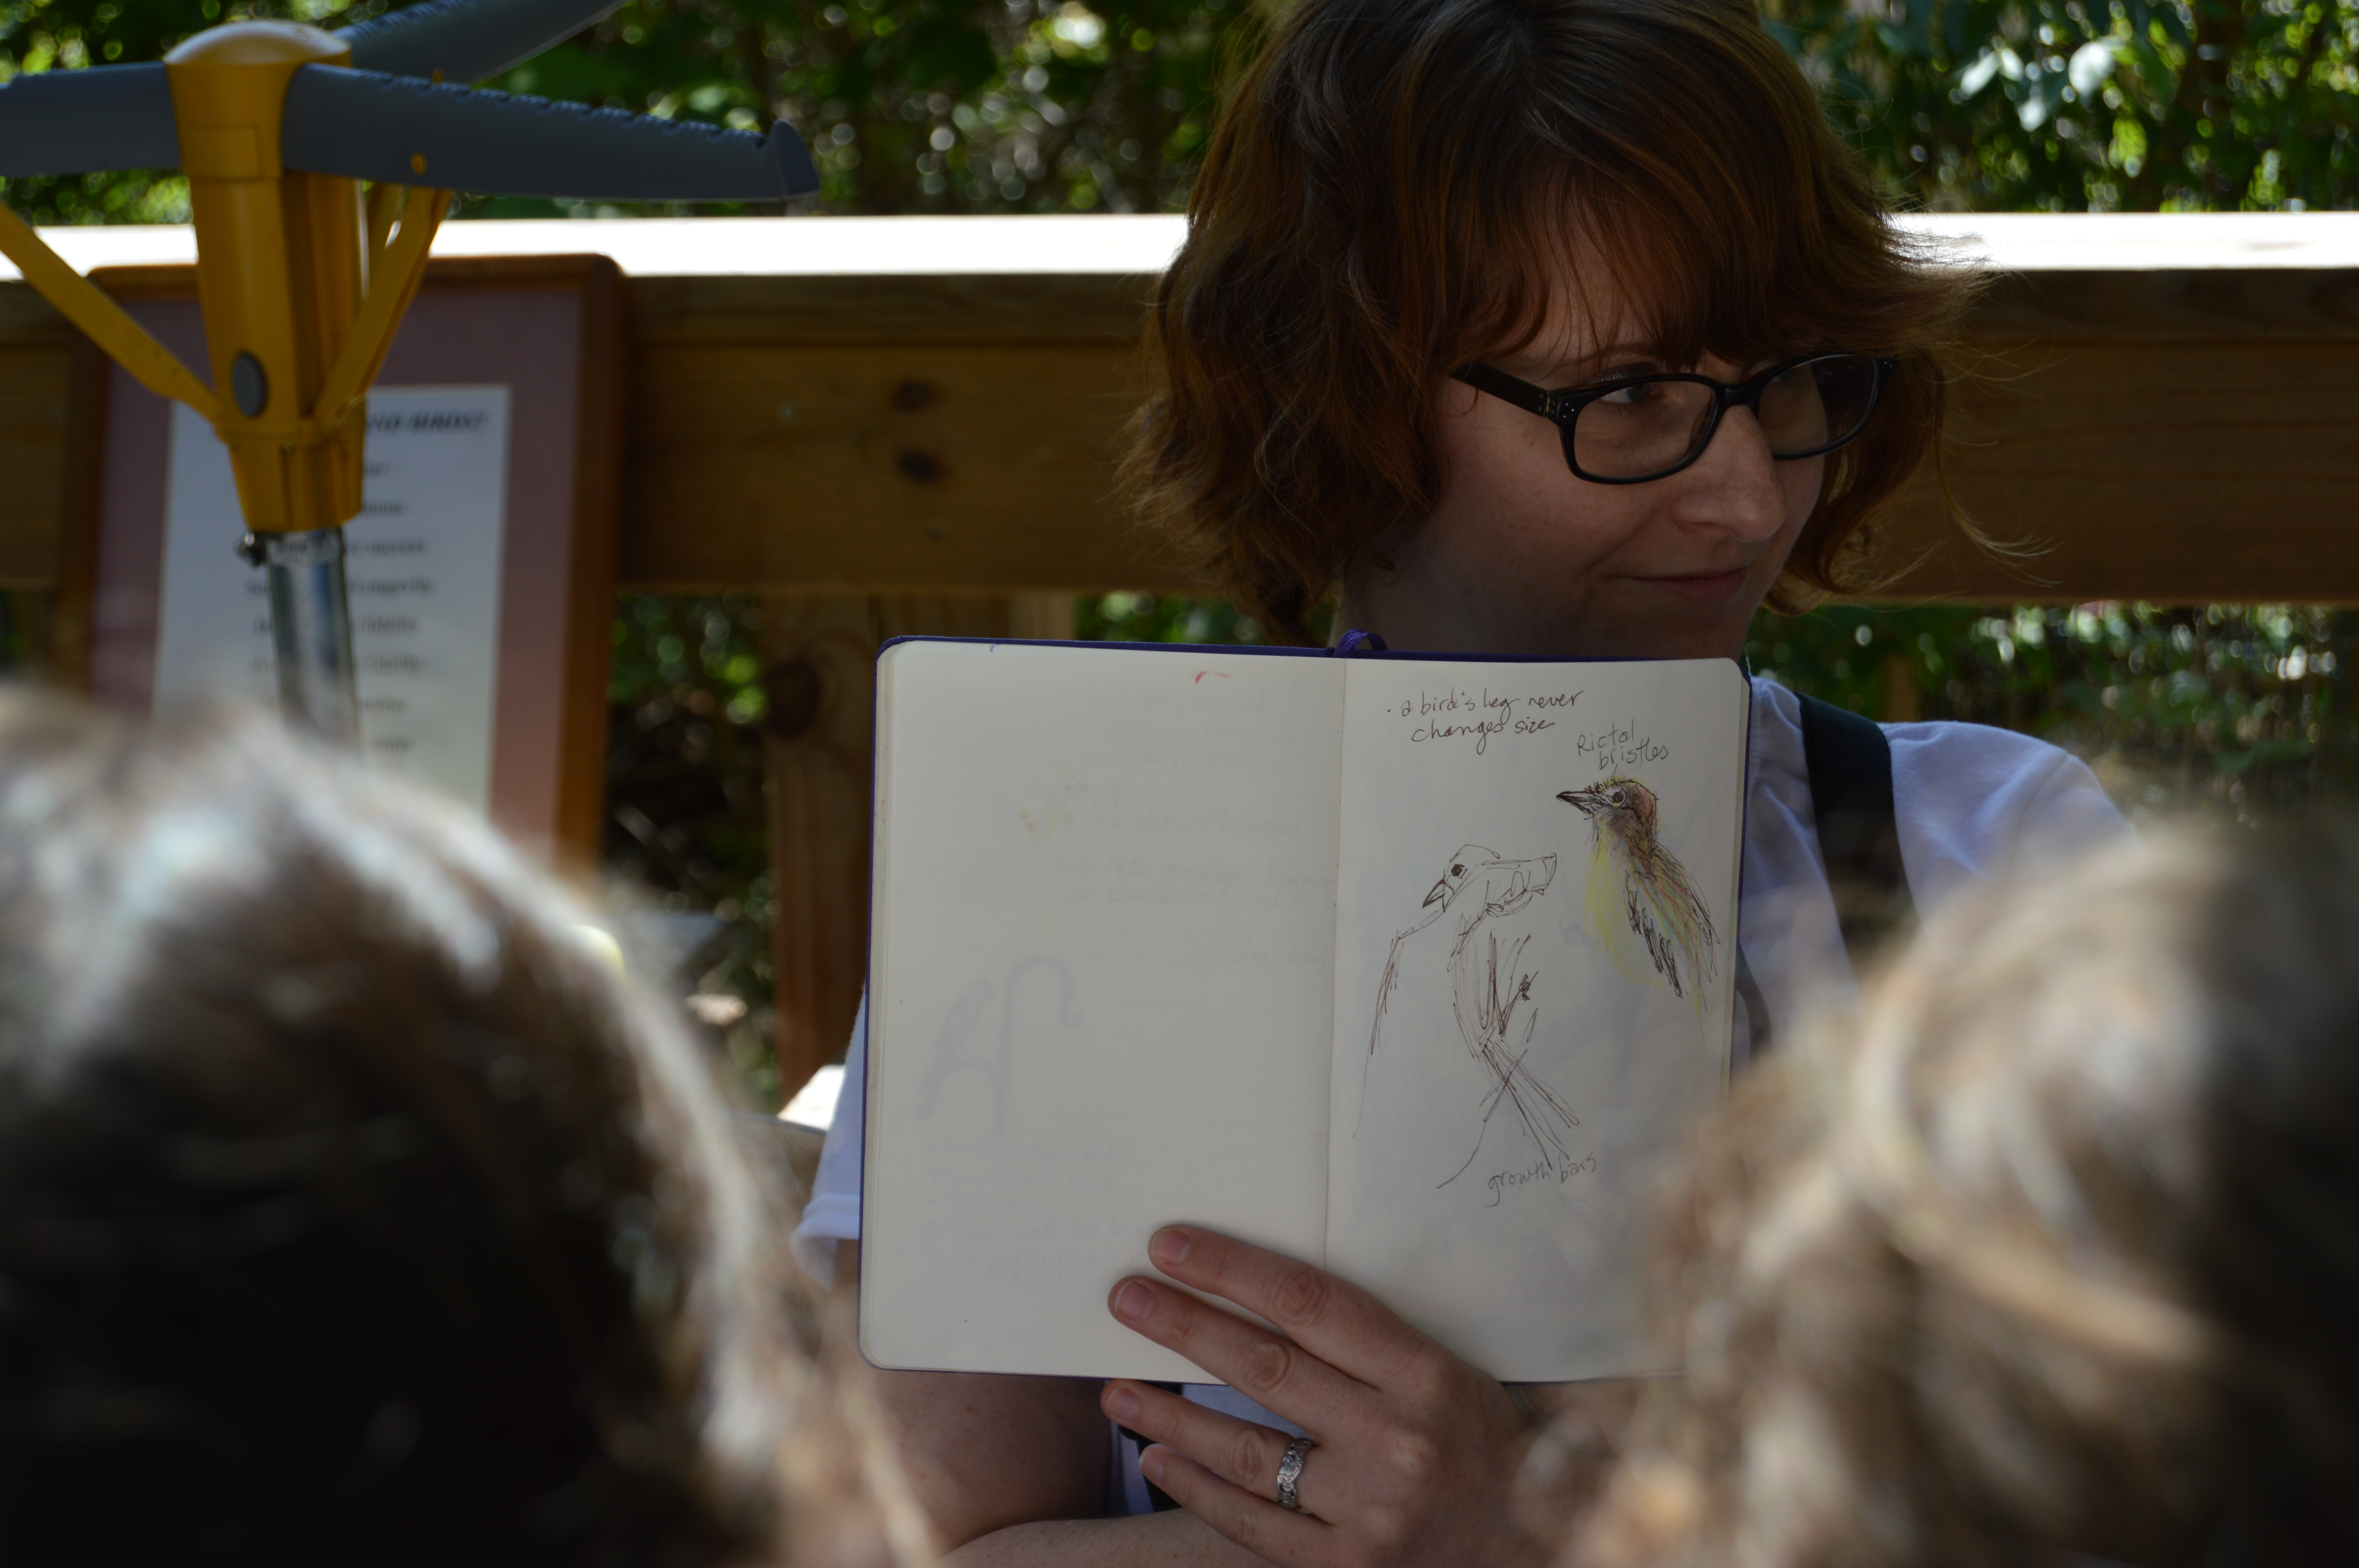 A professional children's book author visited us in May and took beautiful notes on what she learned. Check out here website here!